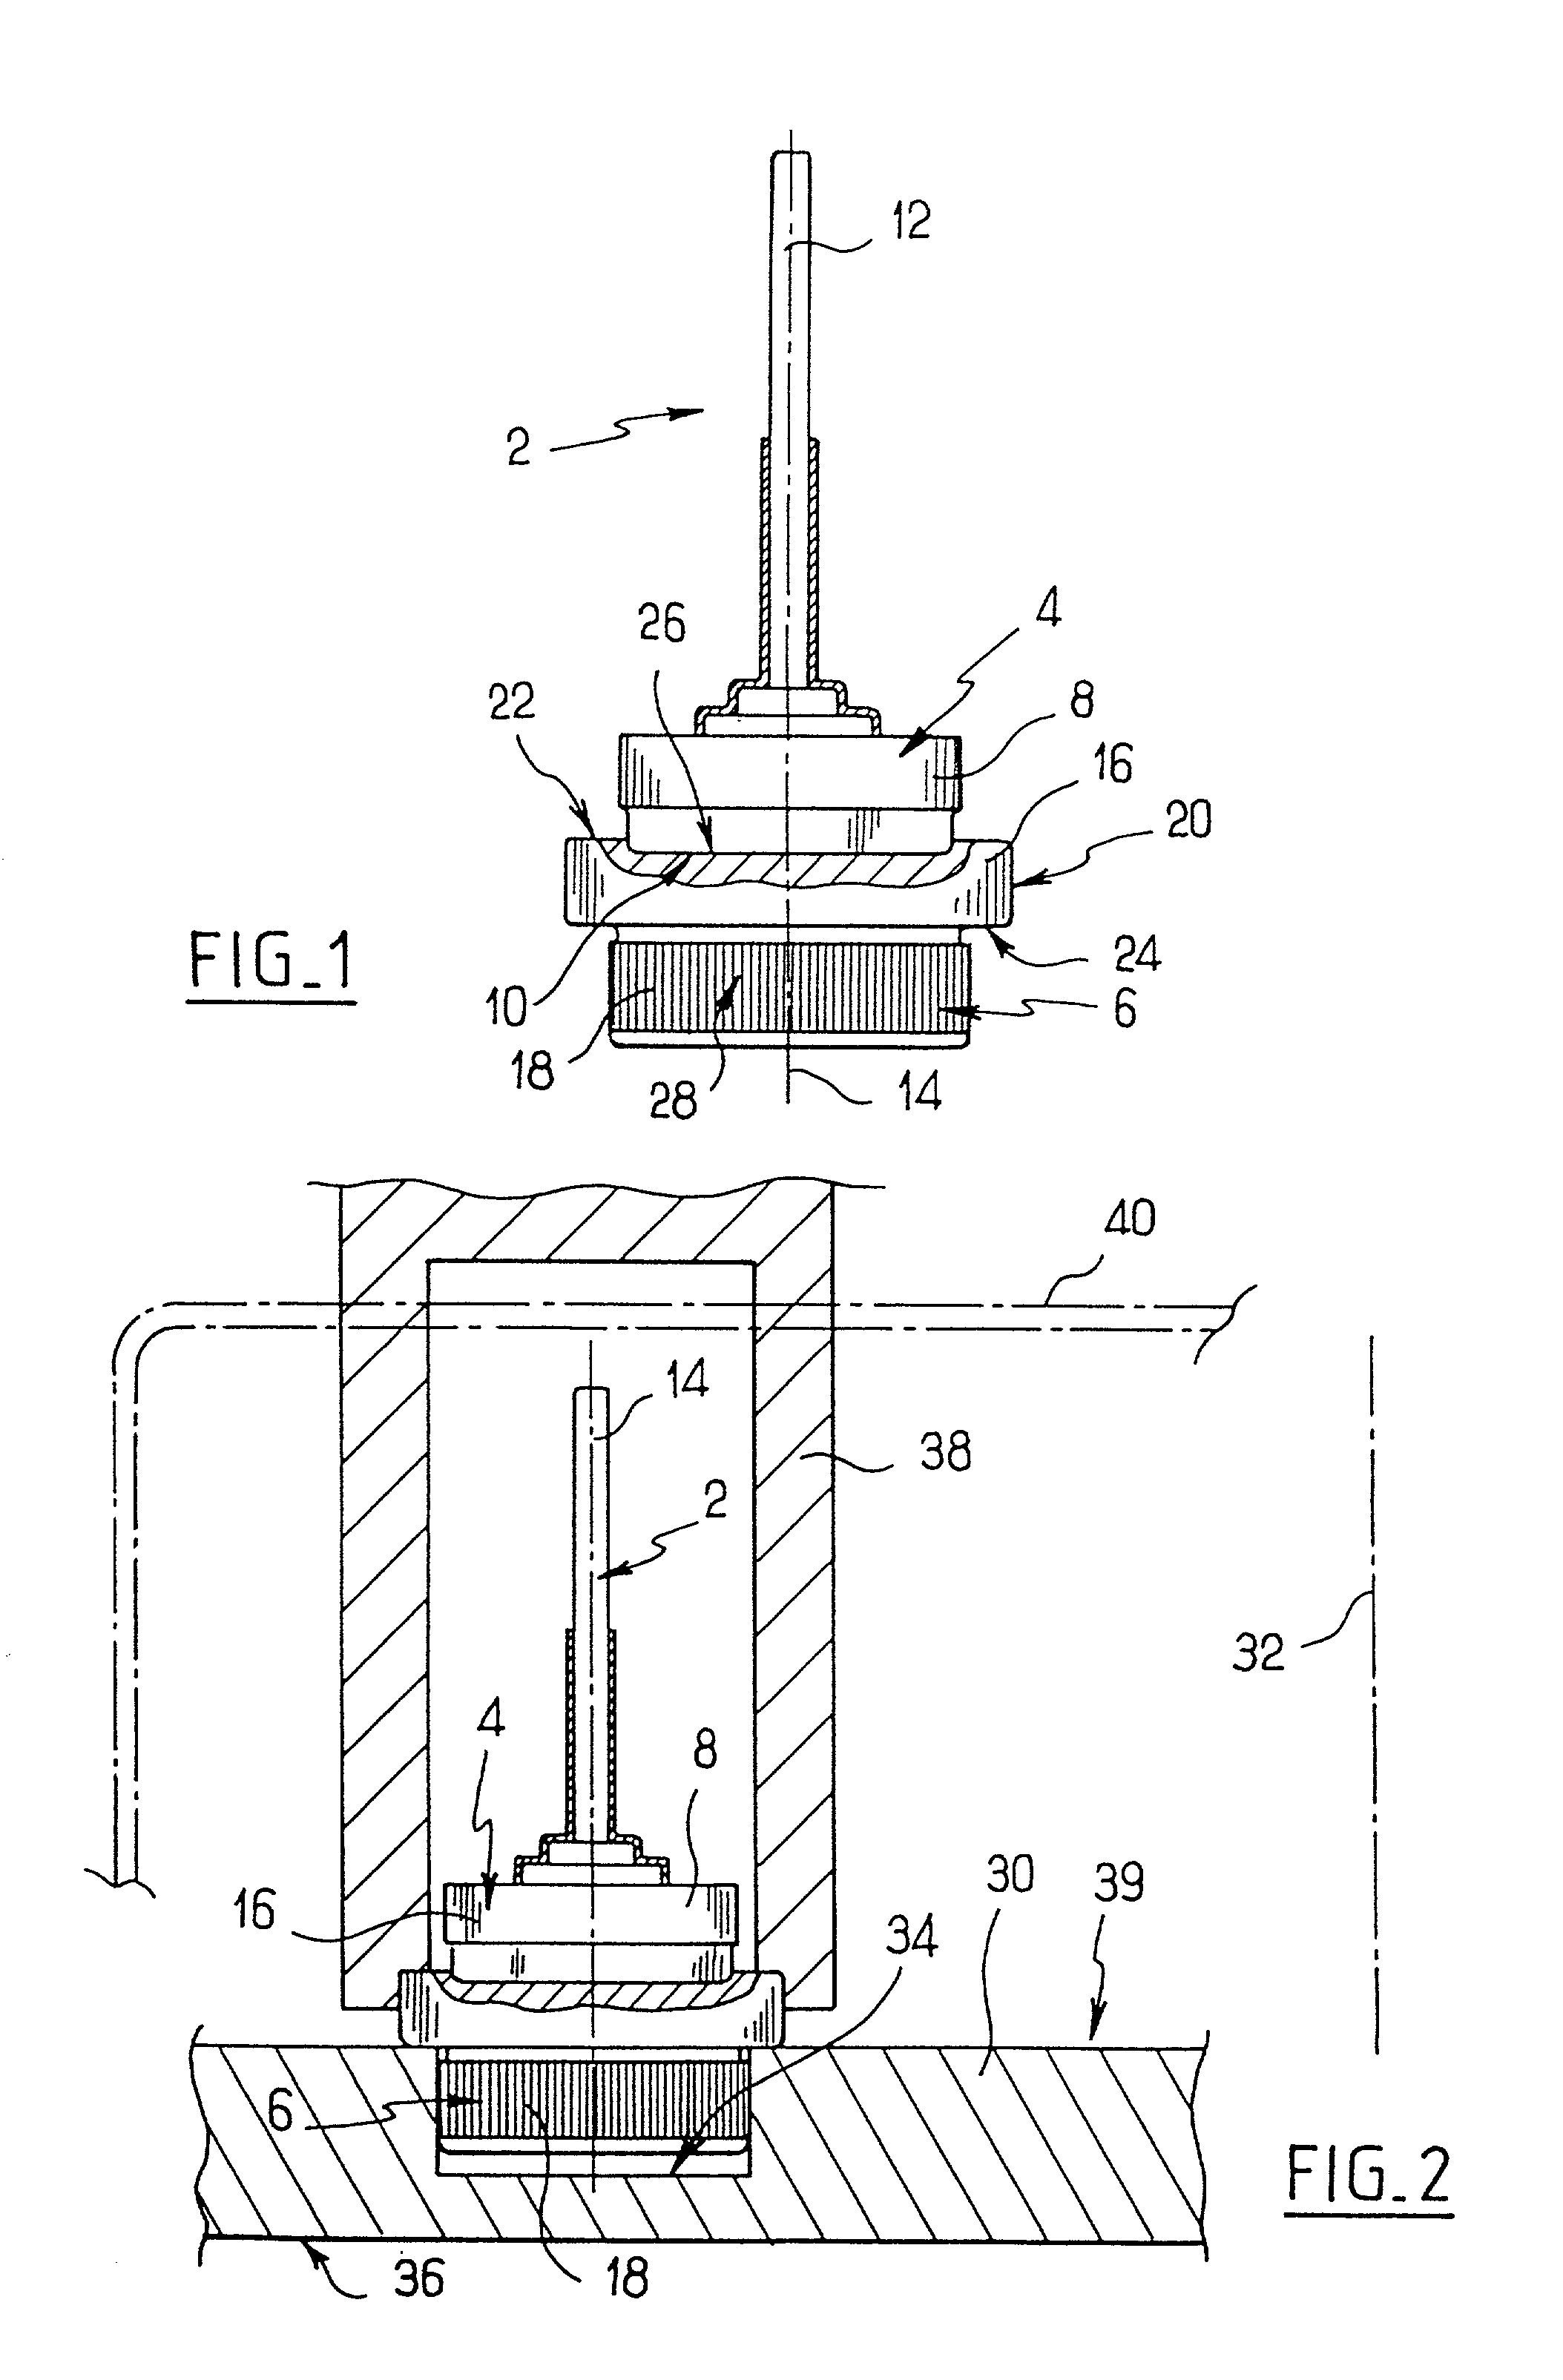 Support plinth for a power diode in a motor vehicle alternator